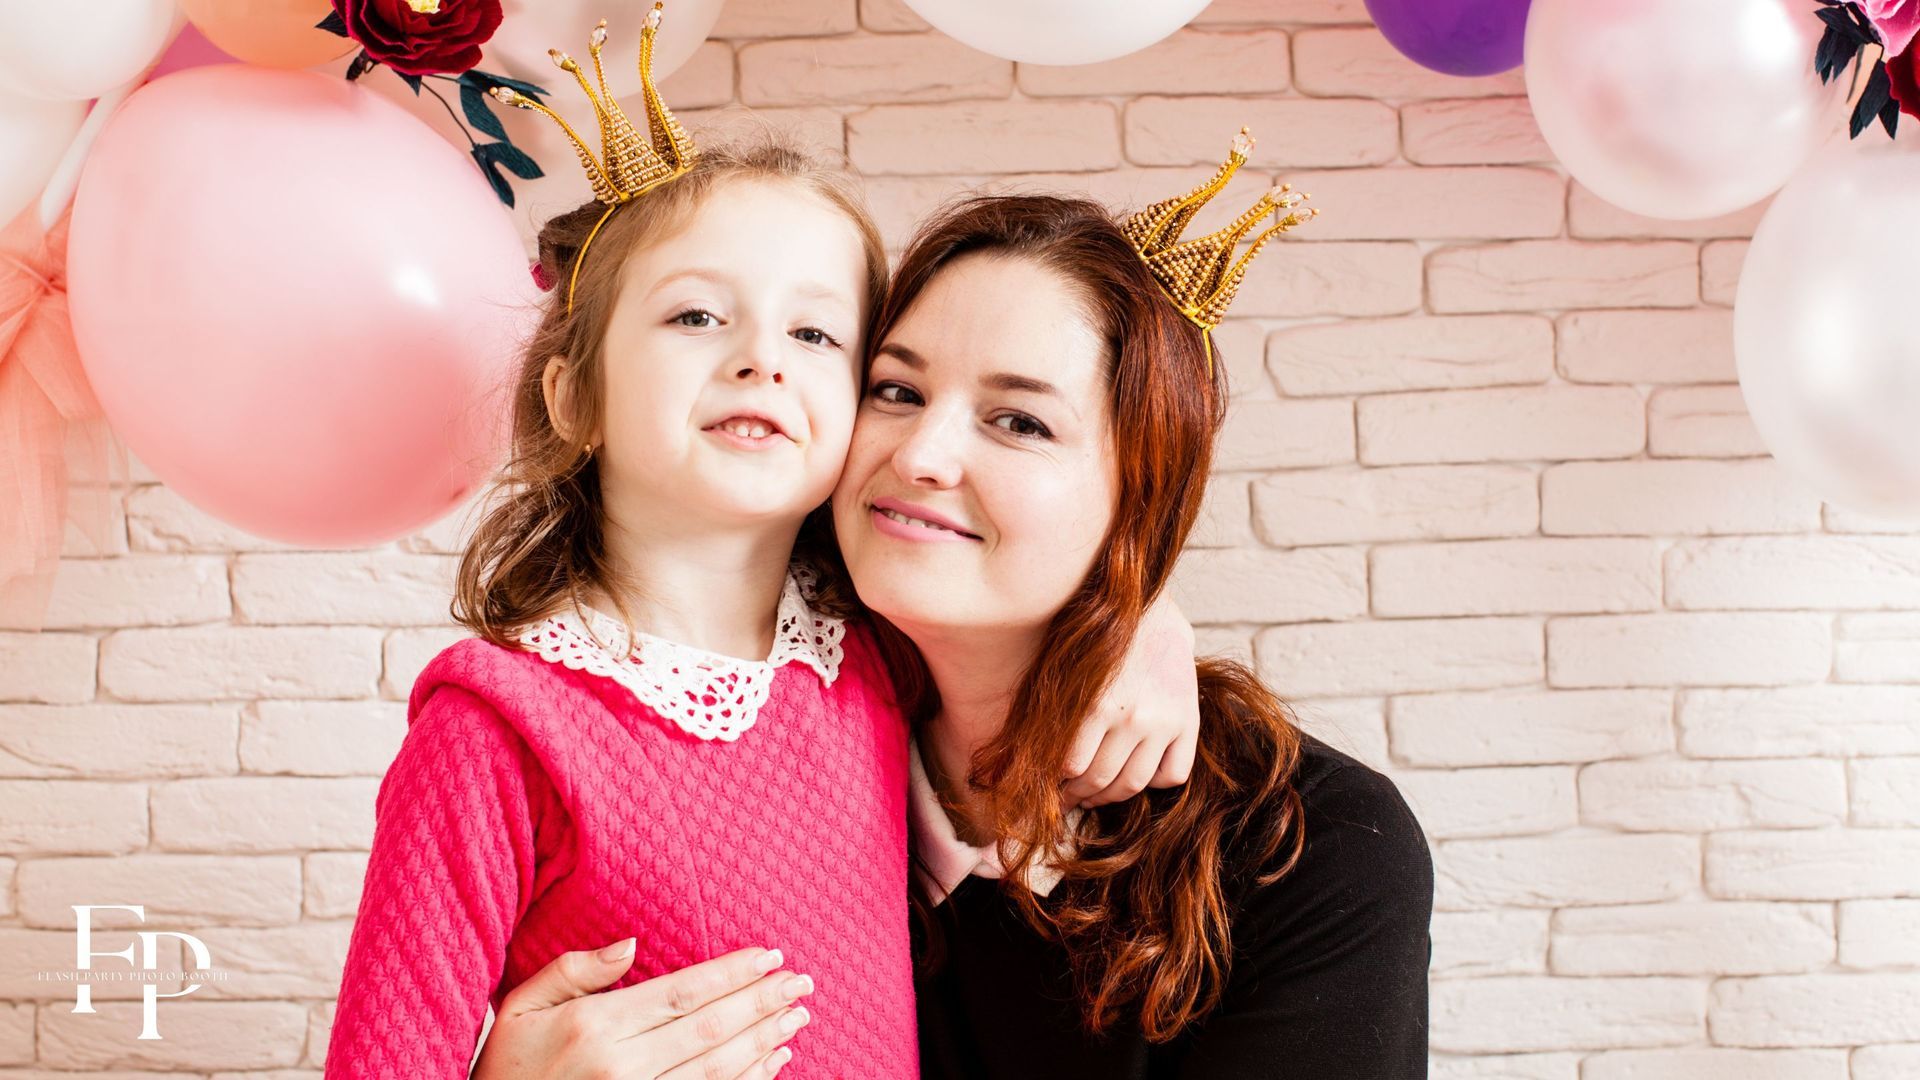 Mom and daughter bonding for a photo at a birthday party